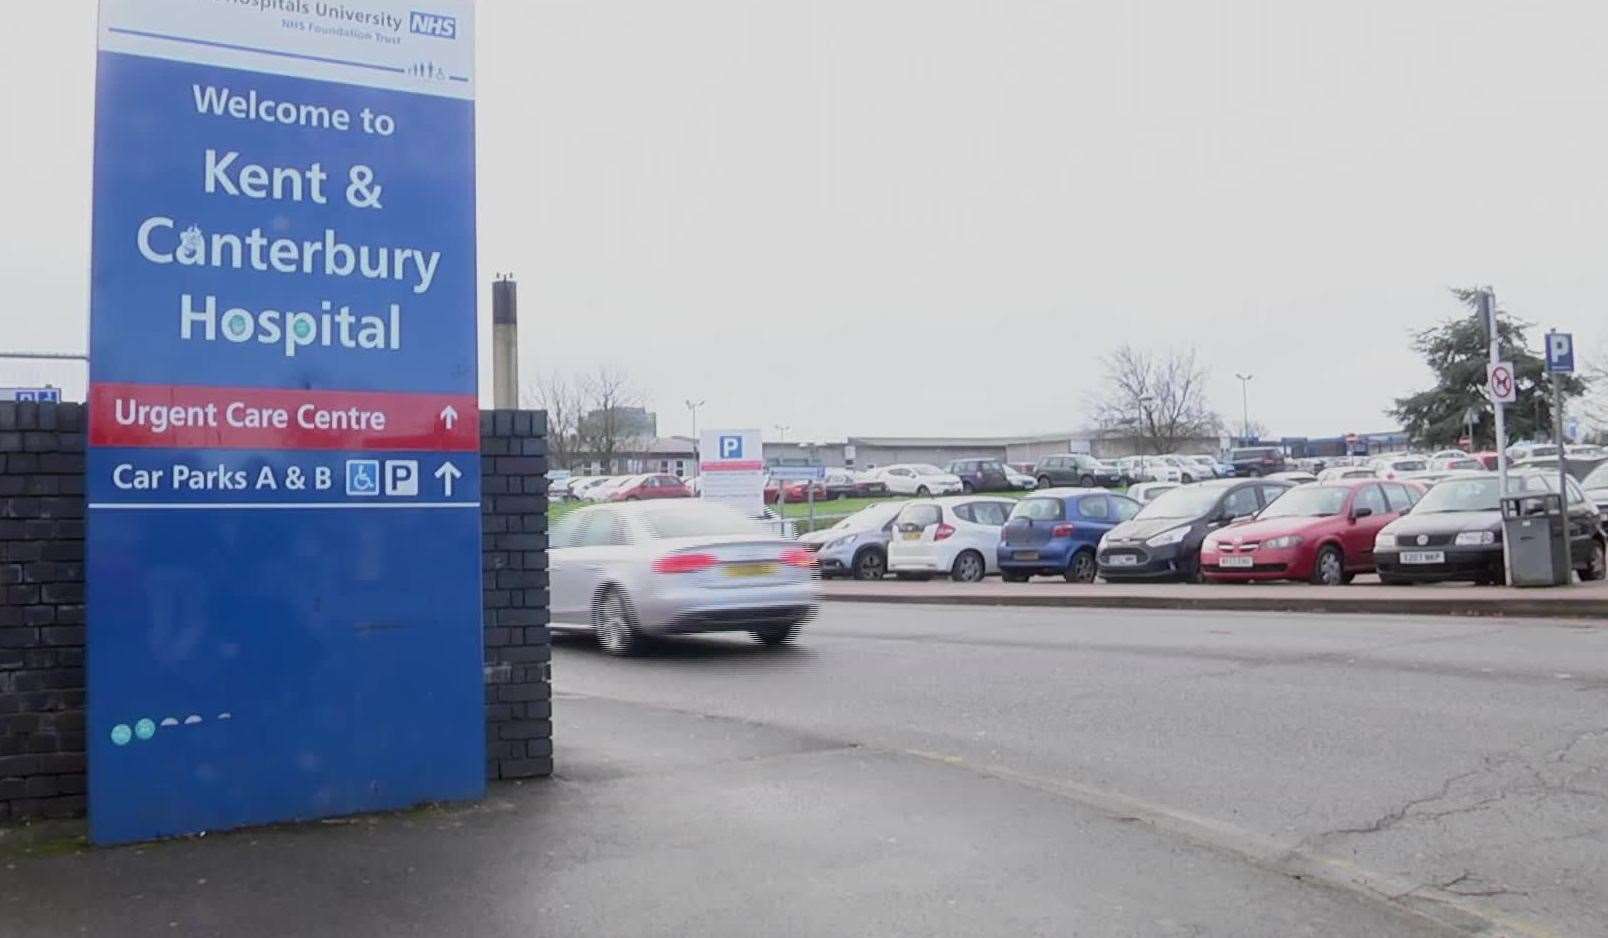 Car parking will be suspended in April and May in all East Kent sites.